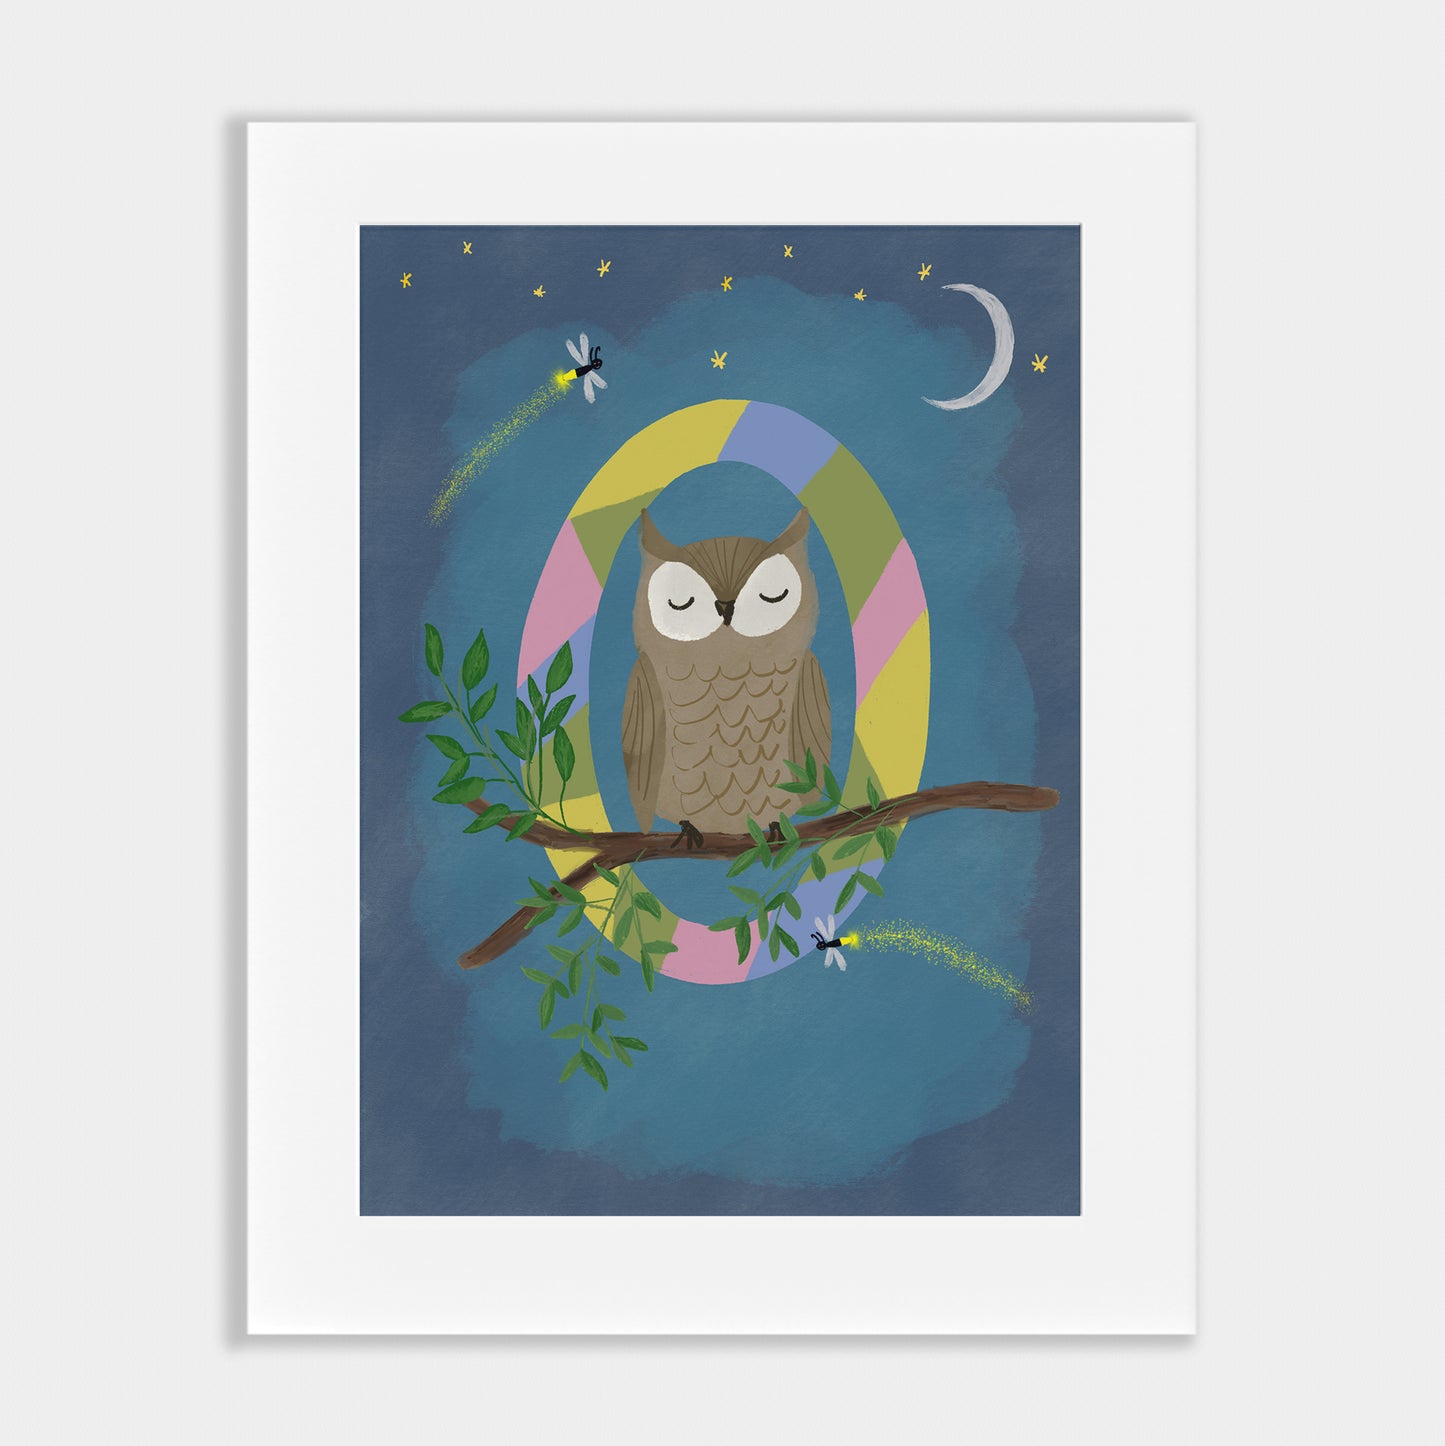 Load image into Gallery viewer, Owl
